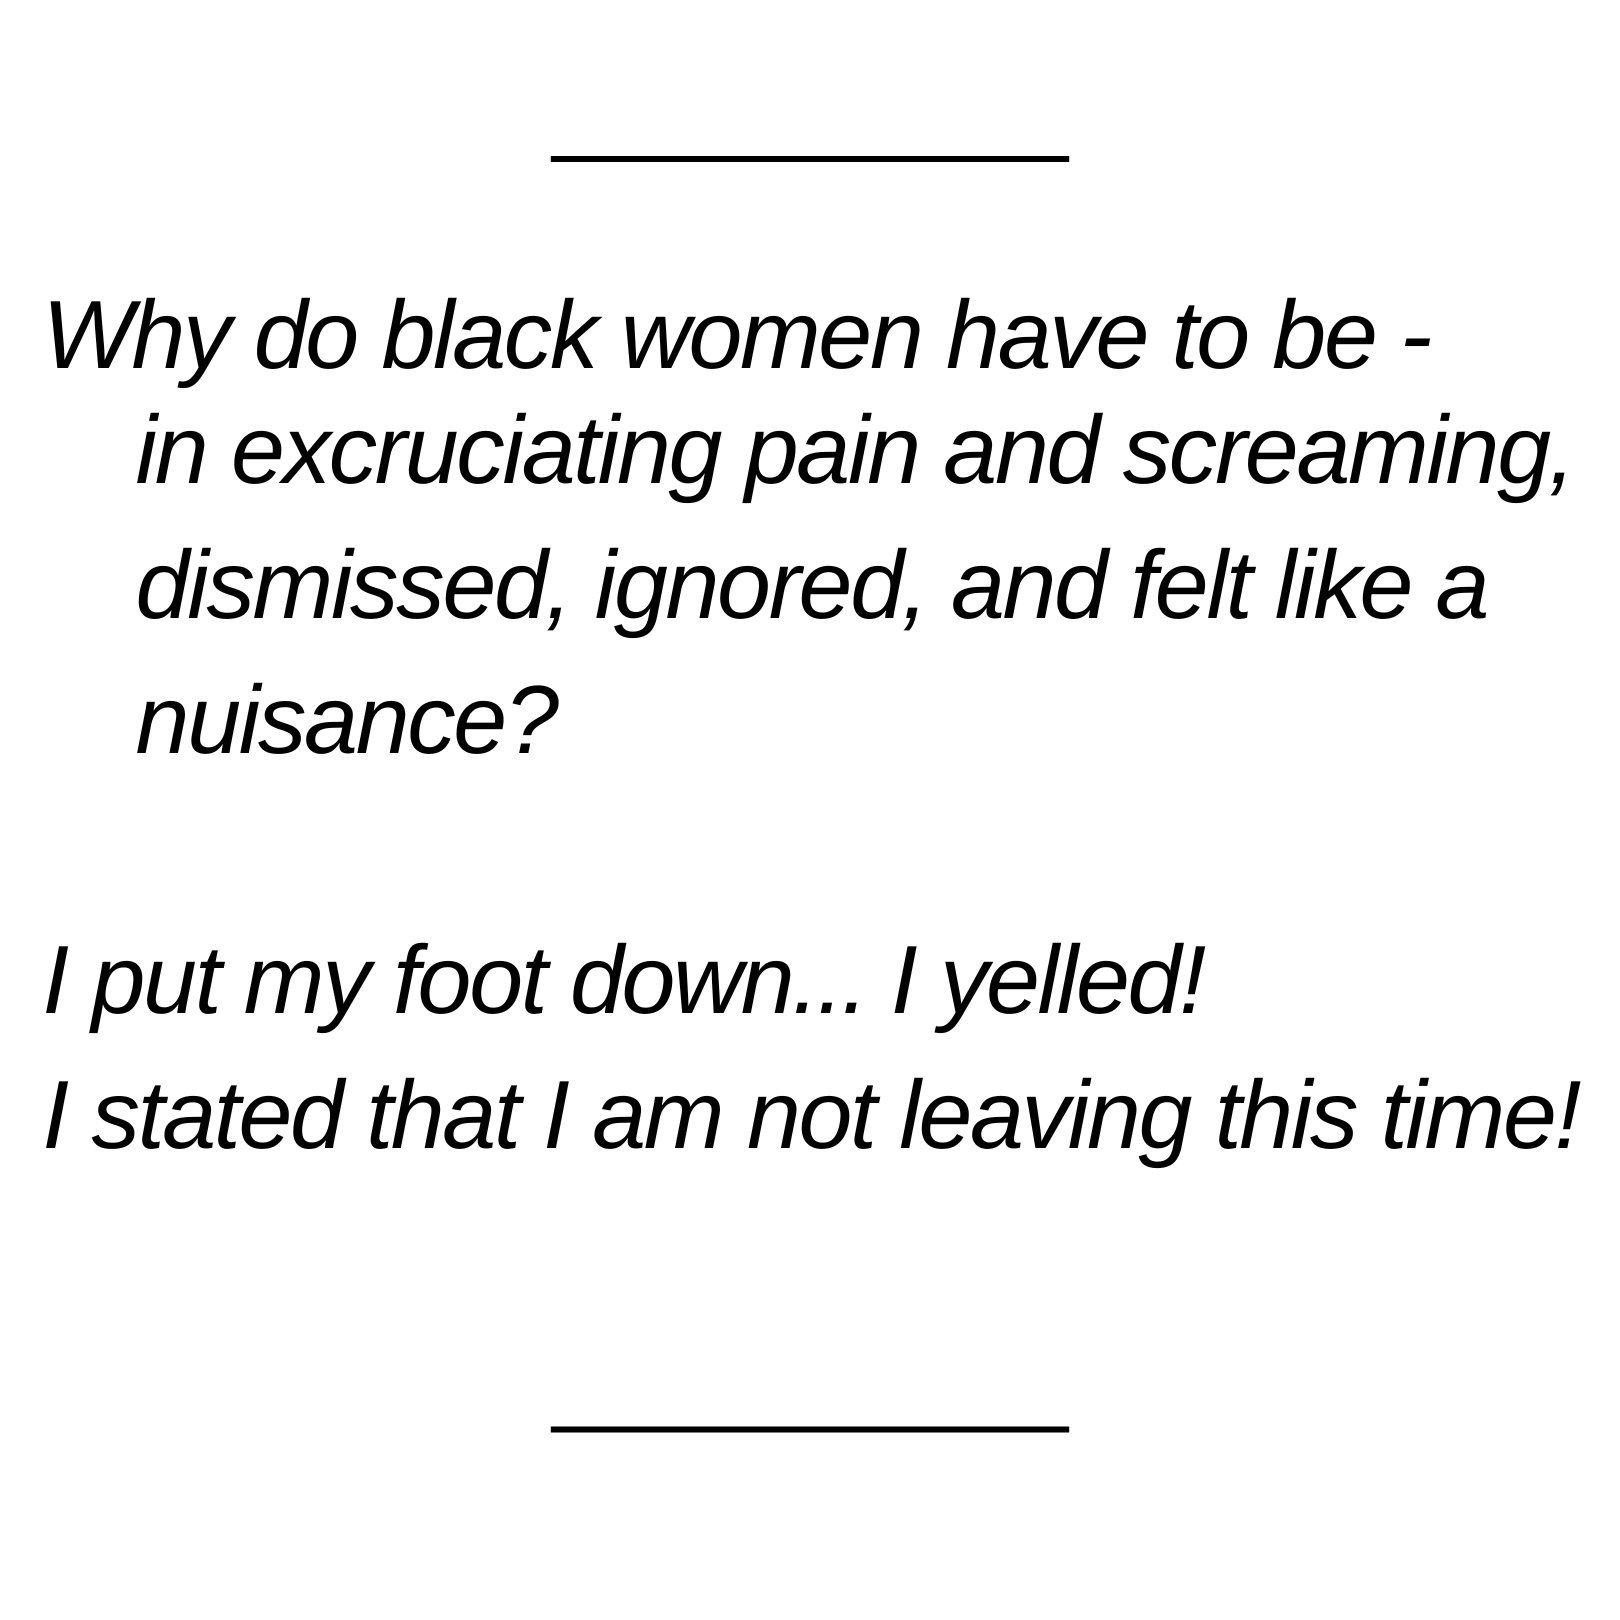 Words on a white background: Why do black women have to be -in excruciating pain and screaming, dismissed, ignored, and felt like a nuisance? I put my foot down... I yelled! I stated that I am not leaving this time!